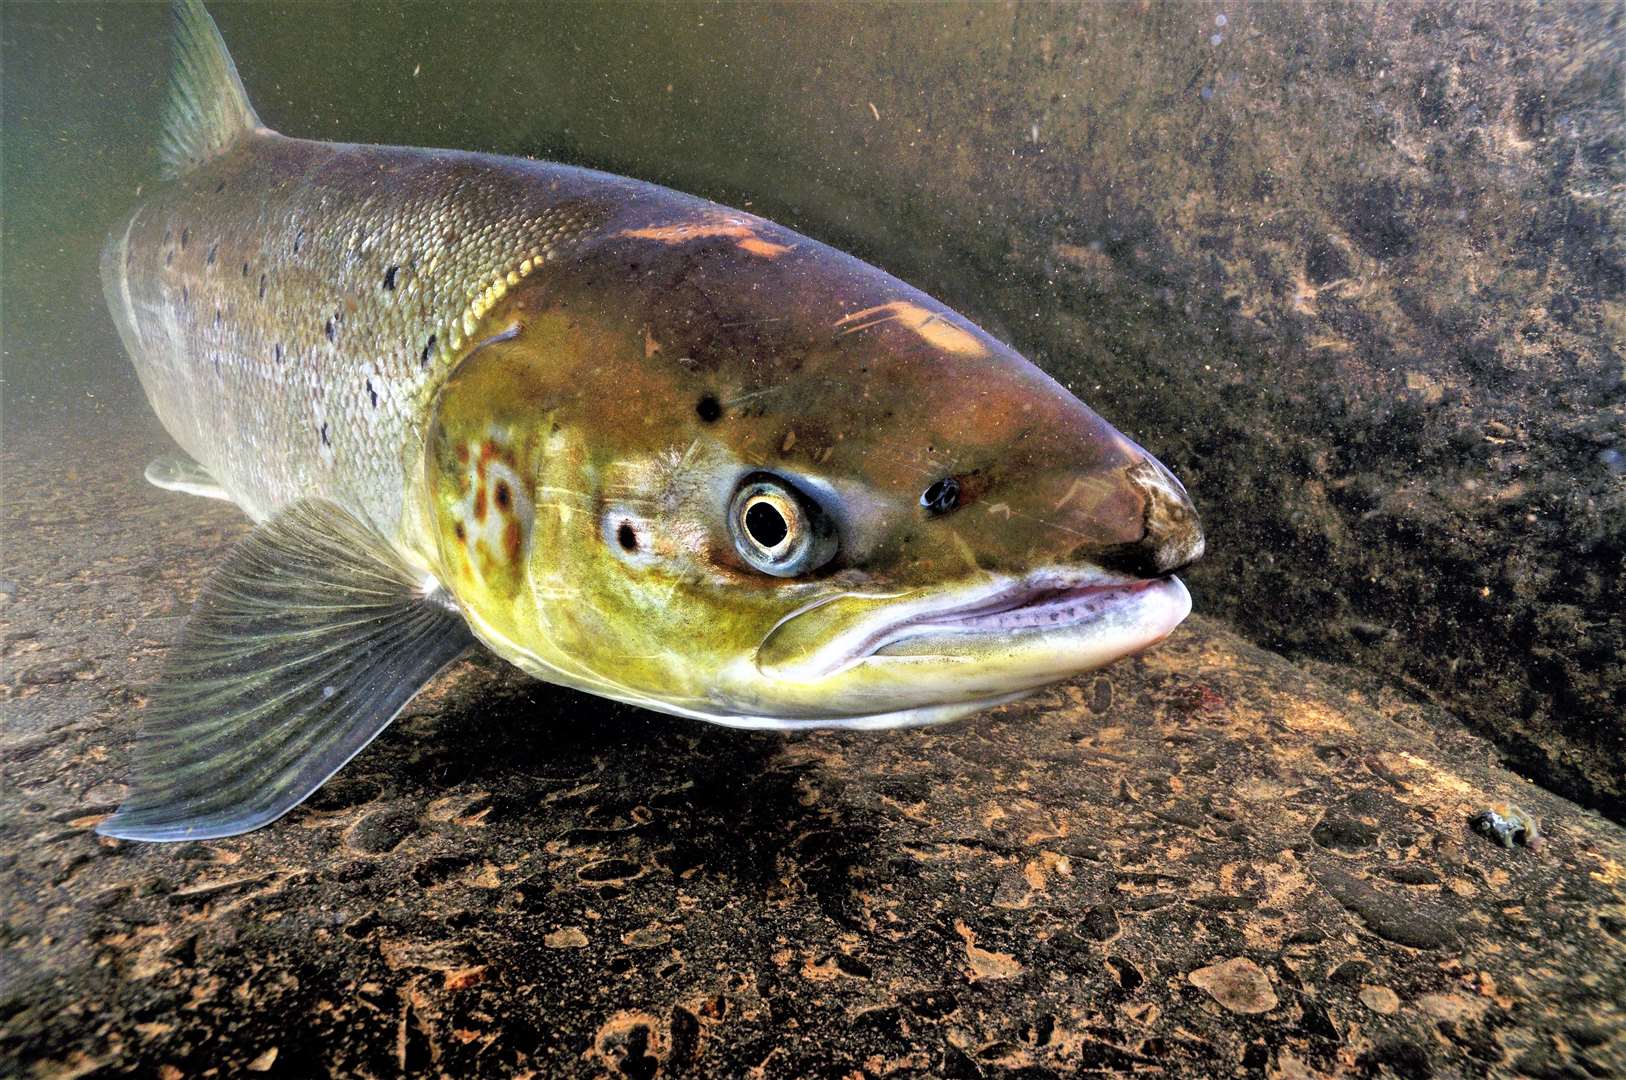 Atlantic salmon (Salmo salar), female, on its migration up river to spawn, in an Environment Agency fish trap (which is a salmon ladder with gates that the staff open once they have recorded the fish).